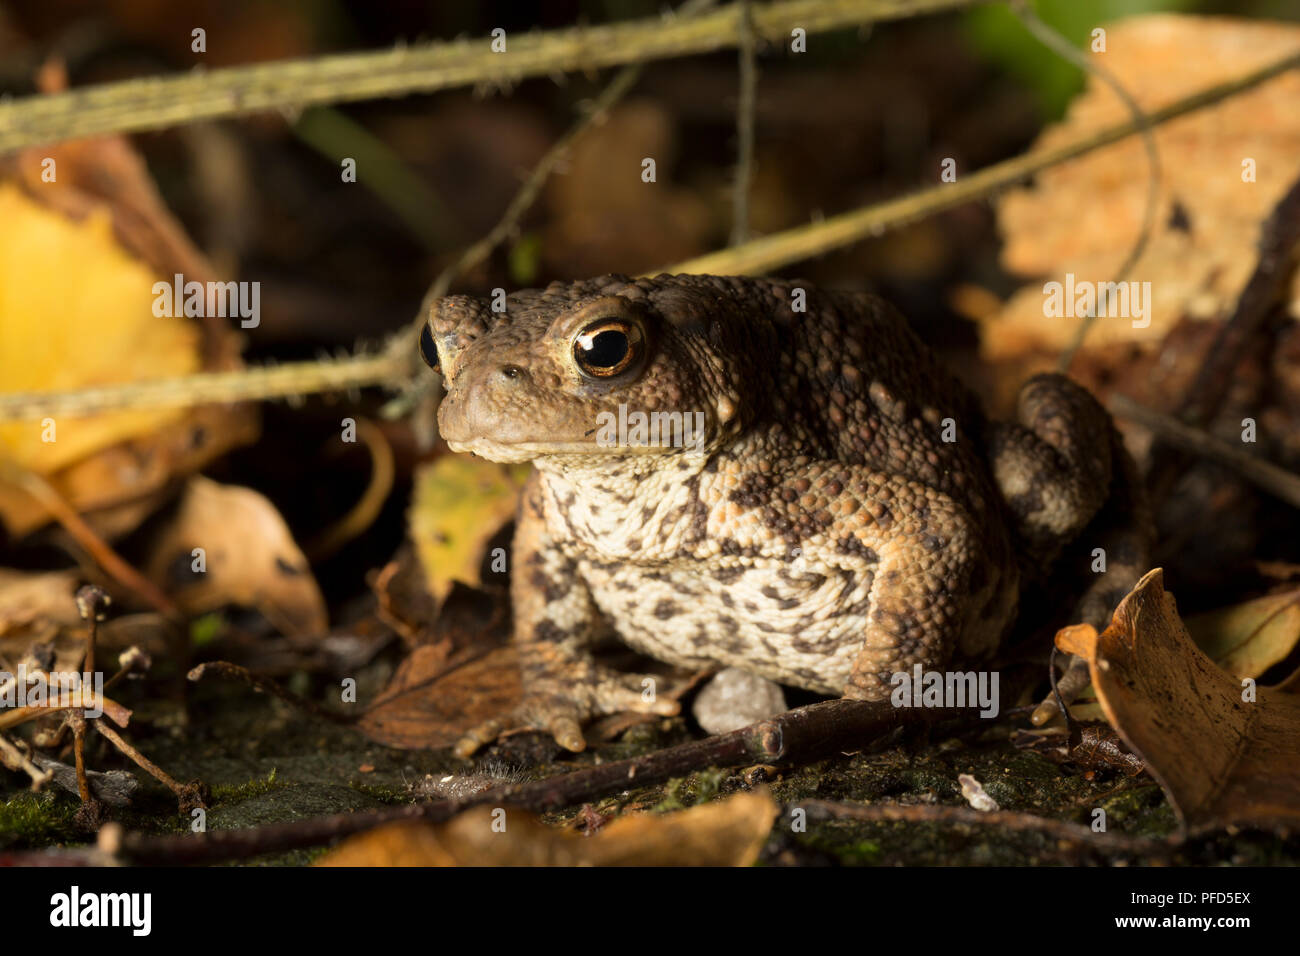 A common or european toad, Bufo bufo, behind a garage photographed at night in a garden in Lancashire North West England UK GB Stock Photo